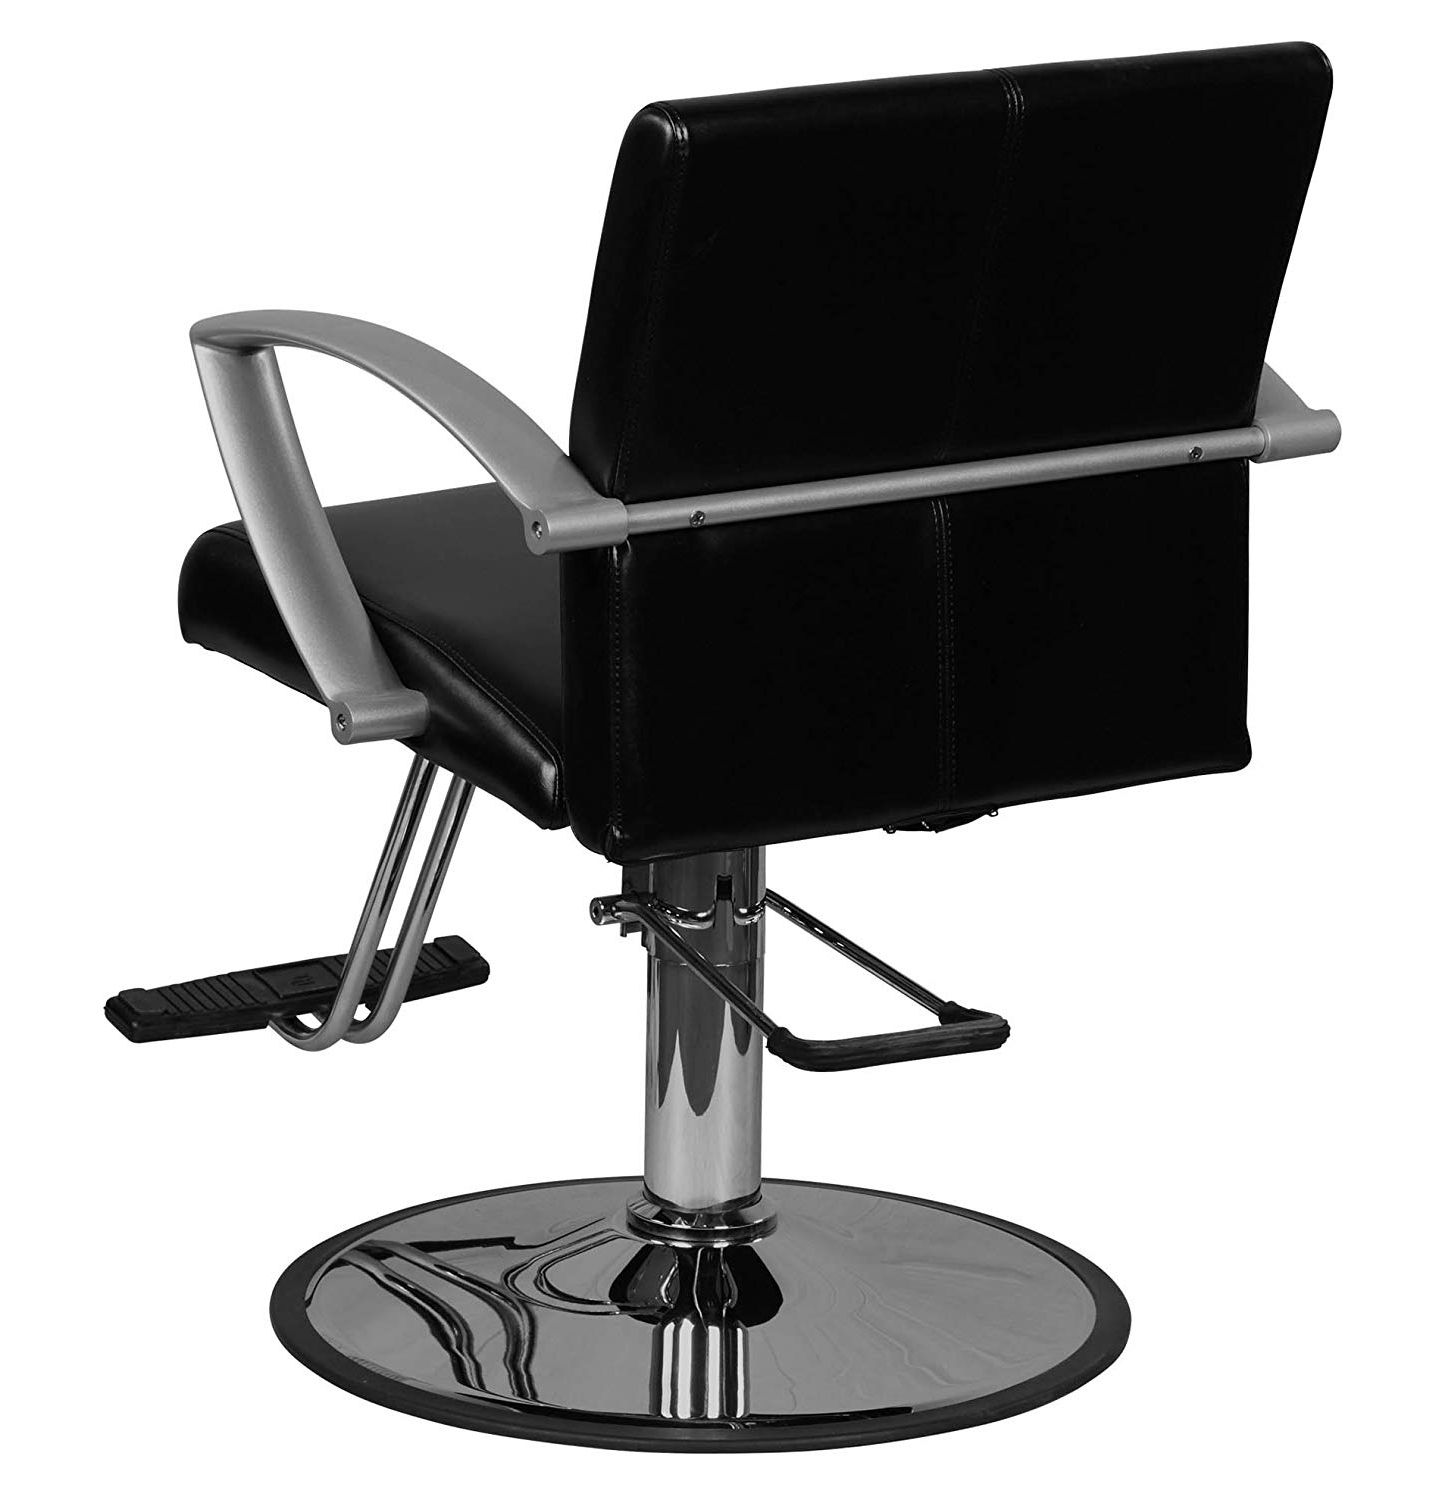 Icarus Round Bar Tables In Preferred Amazon: Icarus"niro" Black Contemporary Styling Chair (View 21 of 25)